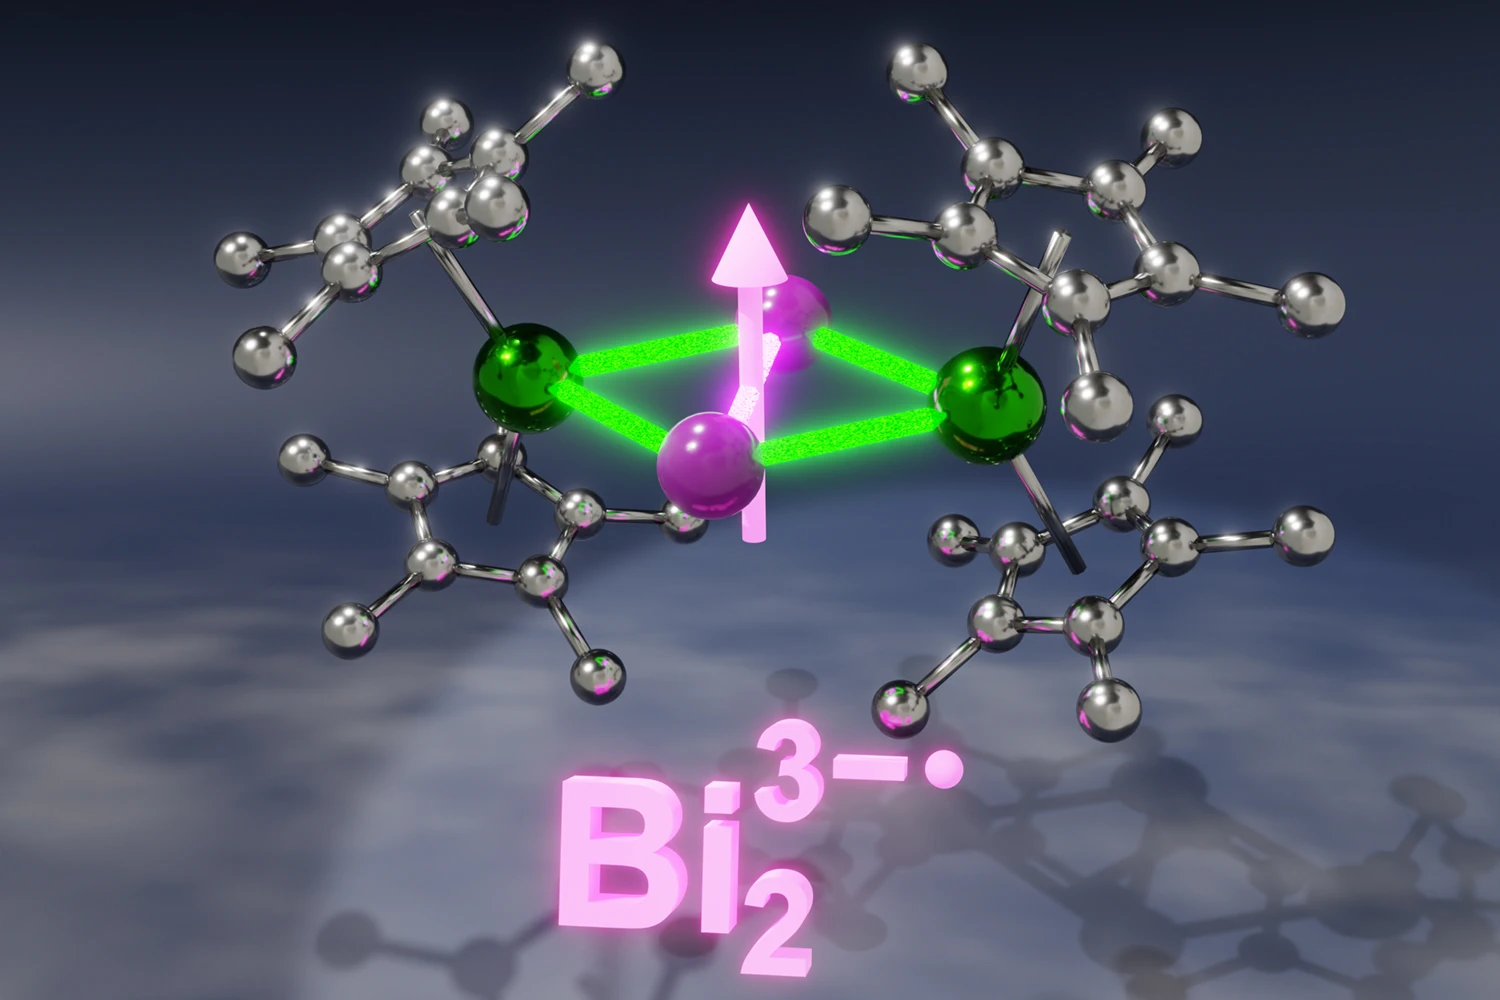 An illustration features lanthanide ions, each encased by two hydrocarbon rings, bridged through a Bi<sub>2</sub><sup>3−•</sup> radical anion. The spin of the Bi<sub>2</sub><sup>3−•</sup> radical is key for the magnetic communication between the lanthanide ions.